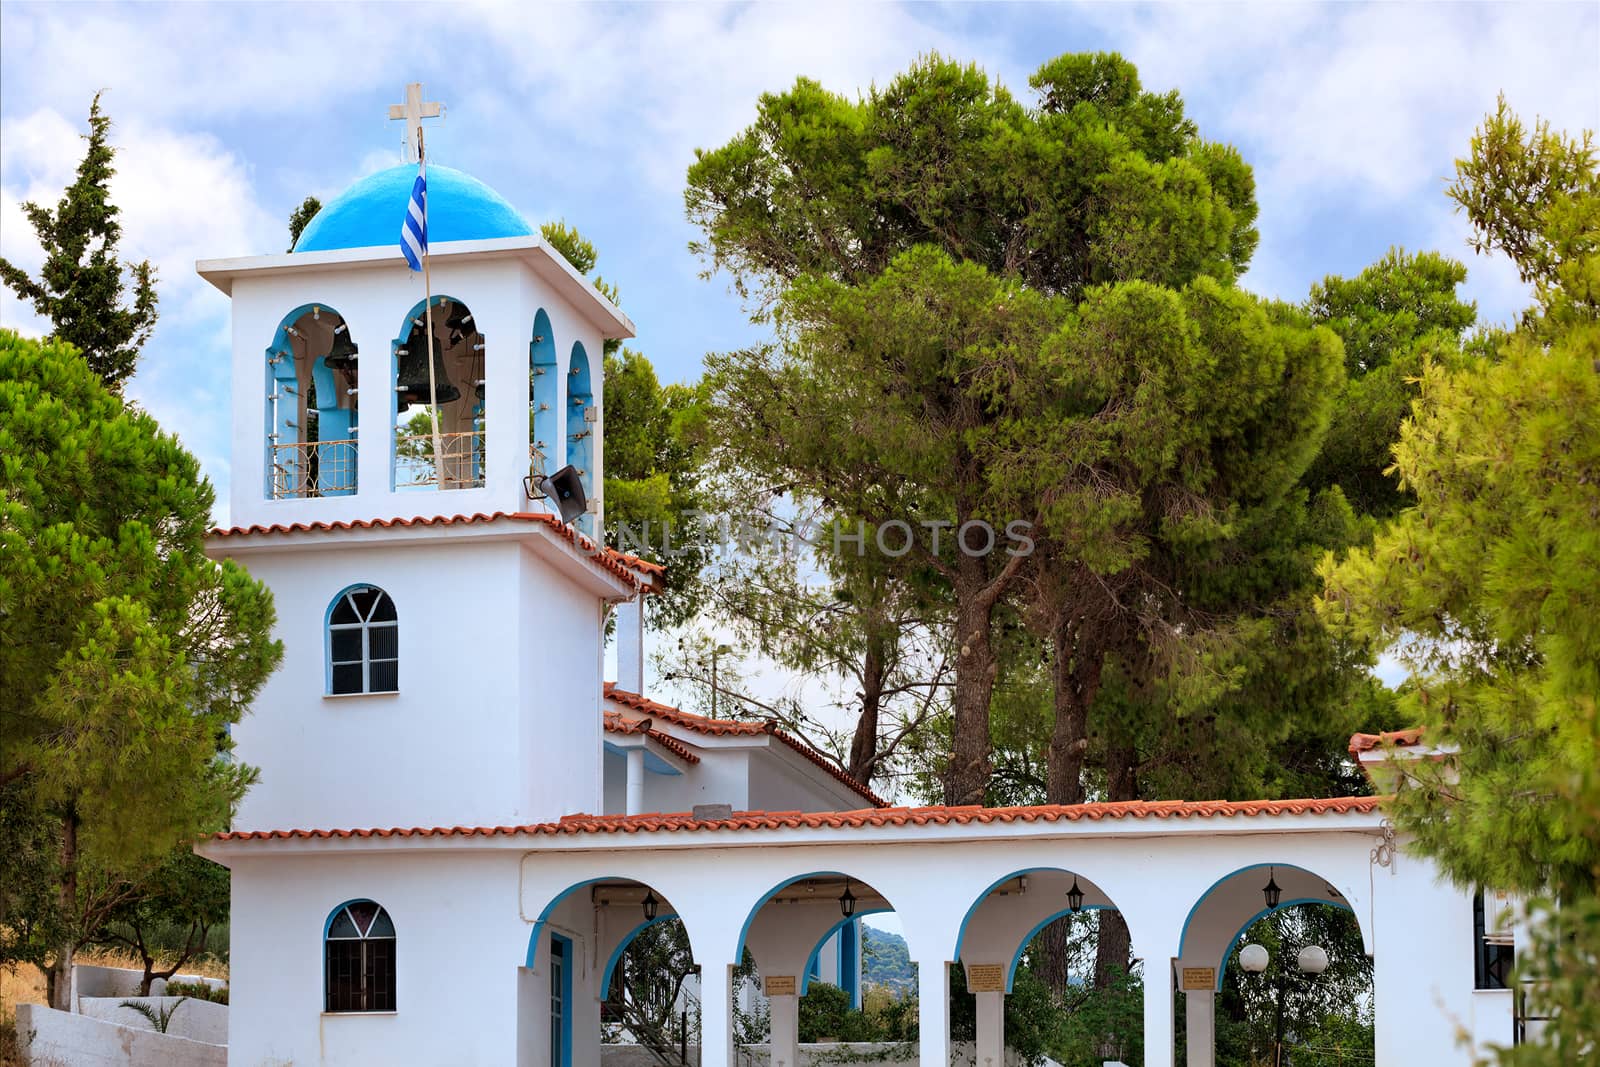 The ritual bell tower of the Orthodox Church of Ekklisia Agios Ioannis in Loutraki surrounded by green Mediterranean spruces, August 15, 2019, Greece.